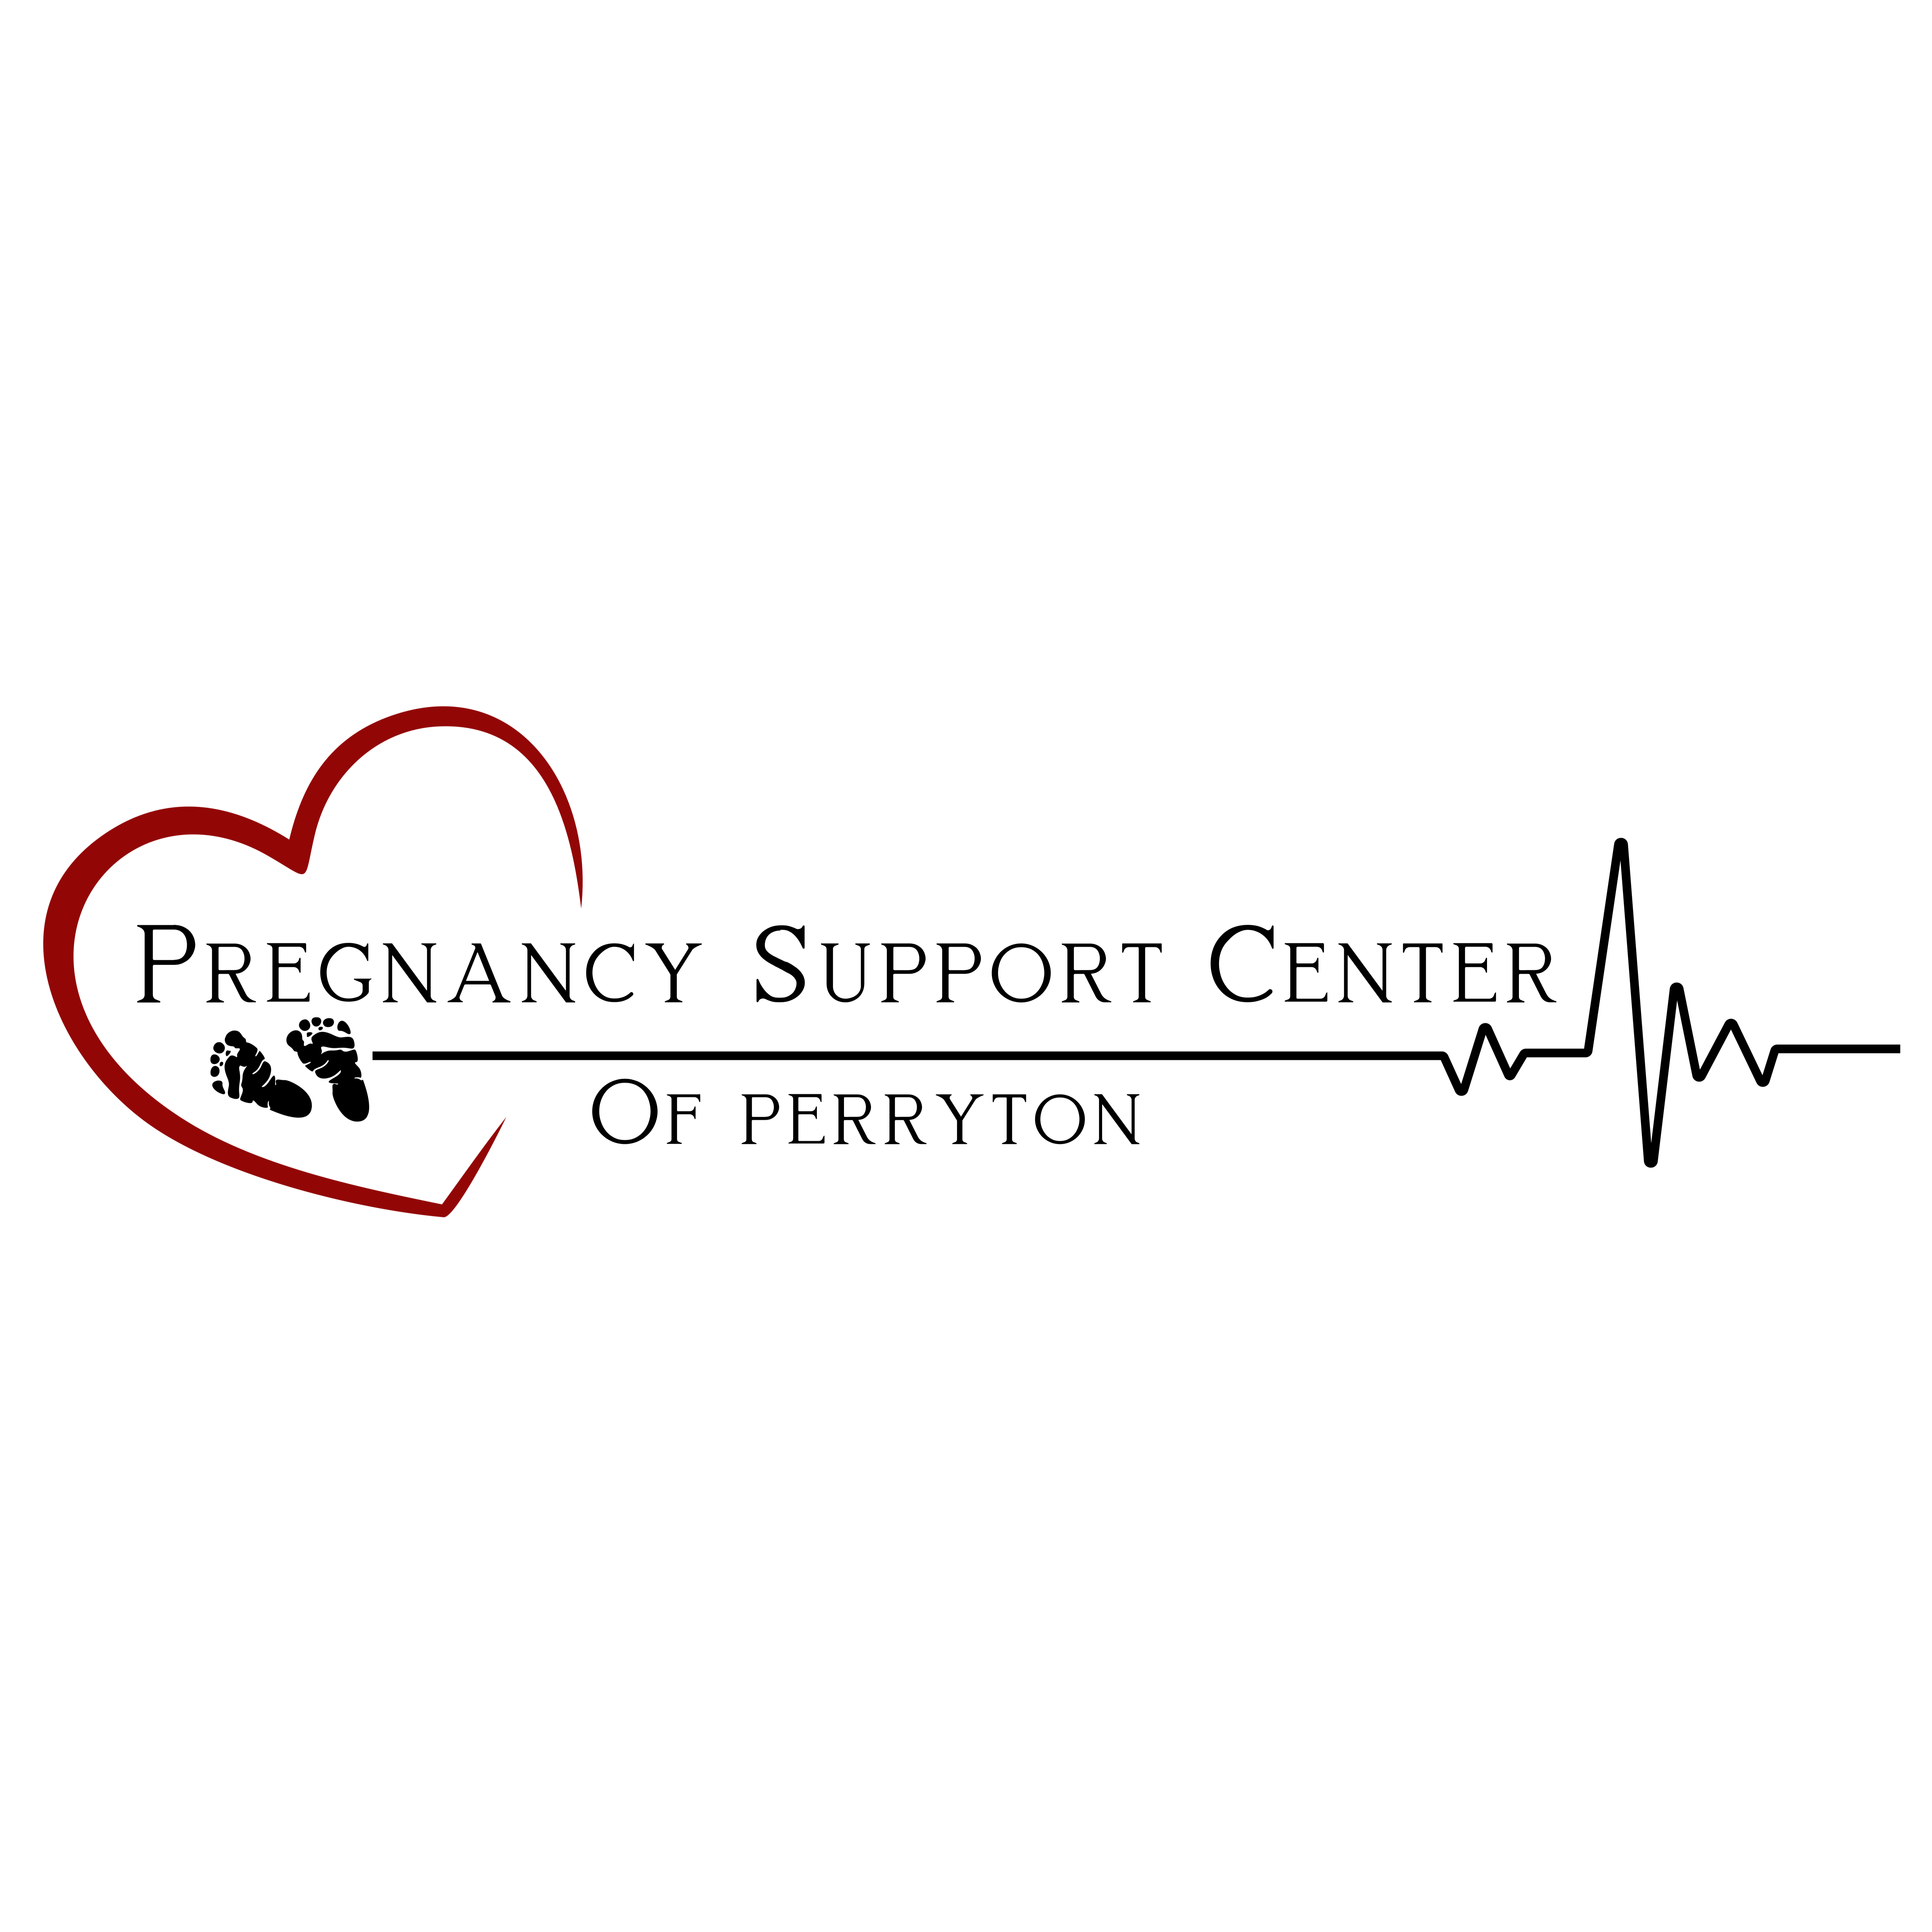 Pregnancy Support Center of Perryton